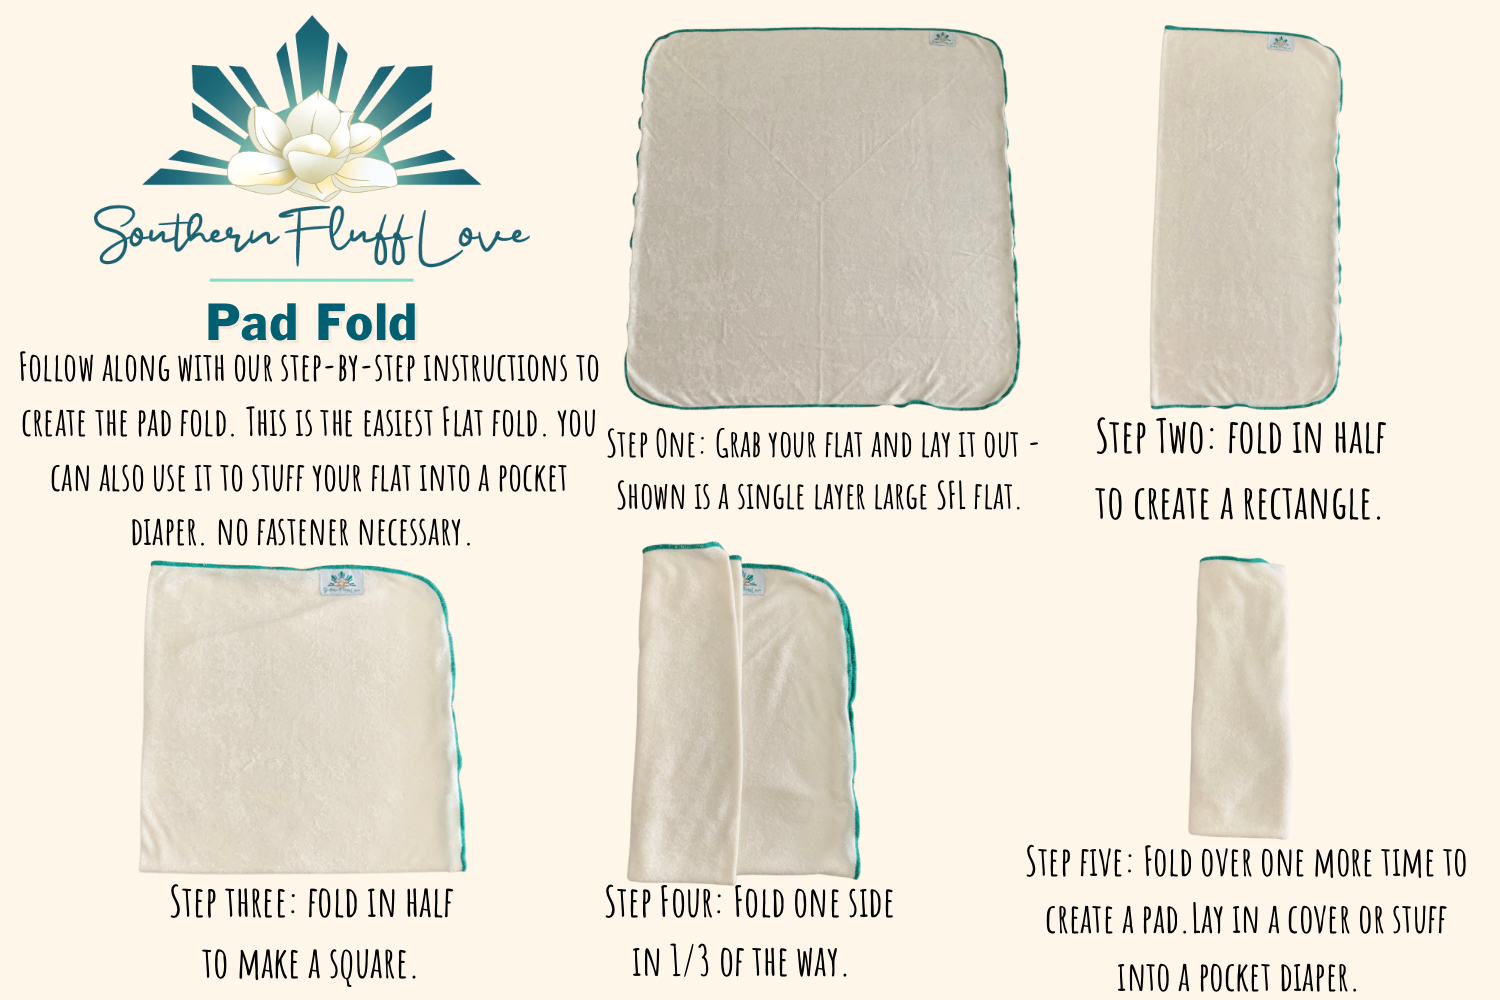 How to Pad Fold a Flat